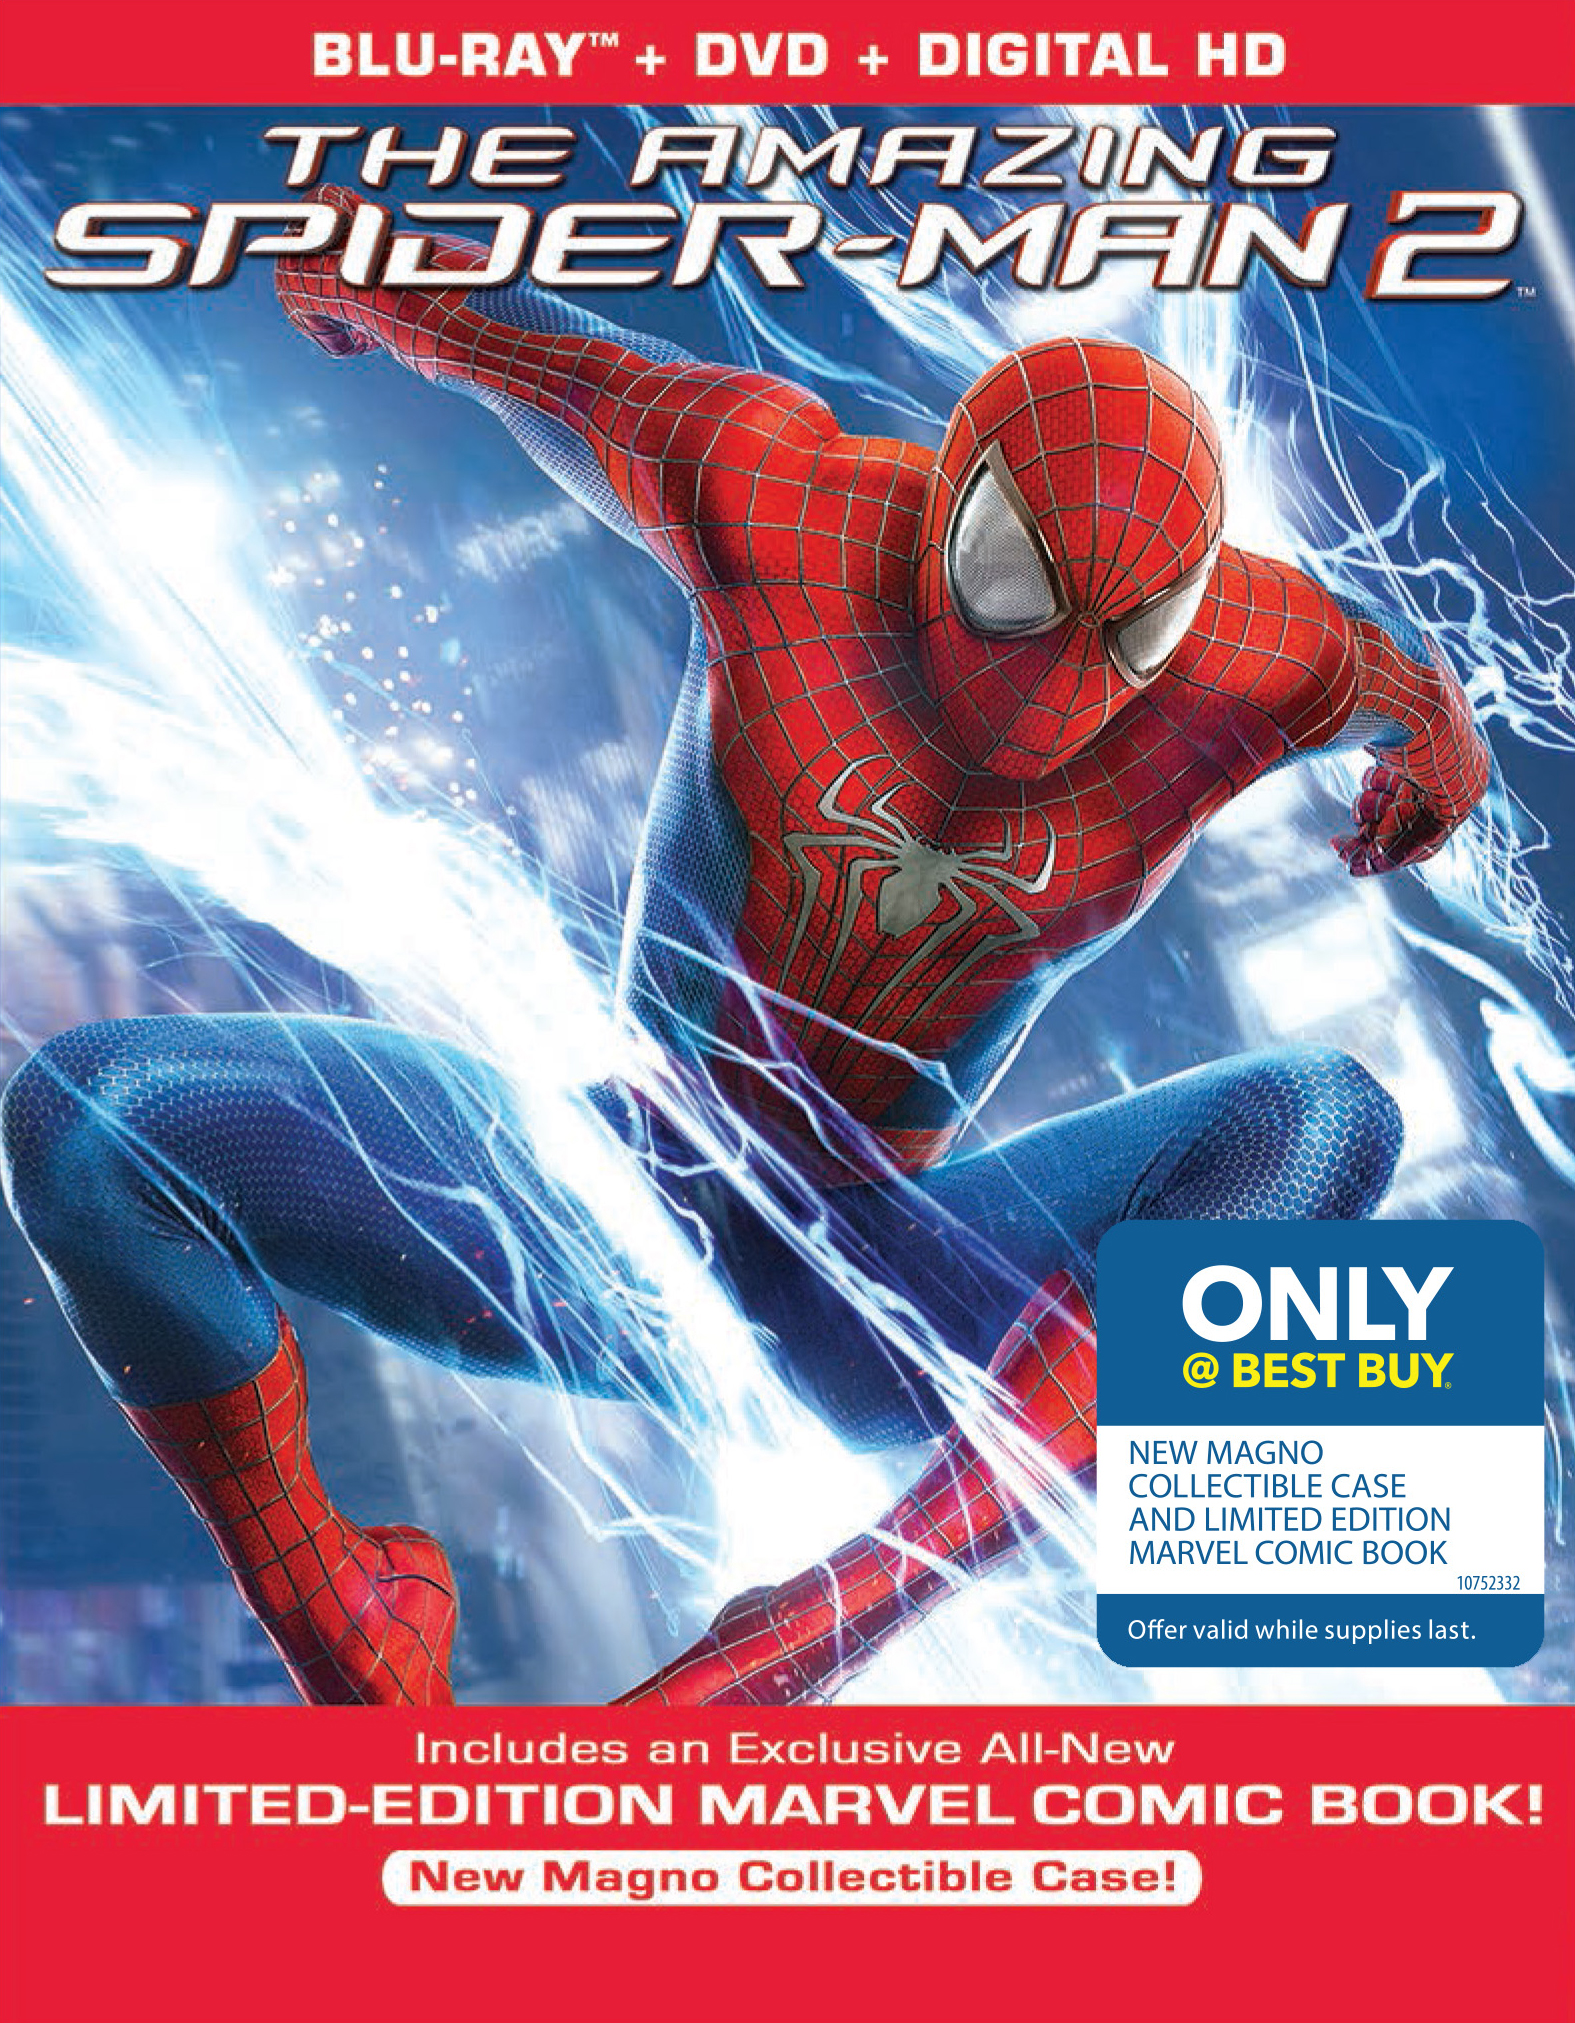 The Amazing Spider-Man 2 [Blu-ray/DVD] [Only @ Best Buy] [Comic Book]  [2014] - Best Buy